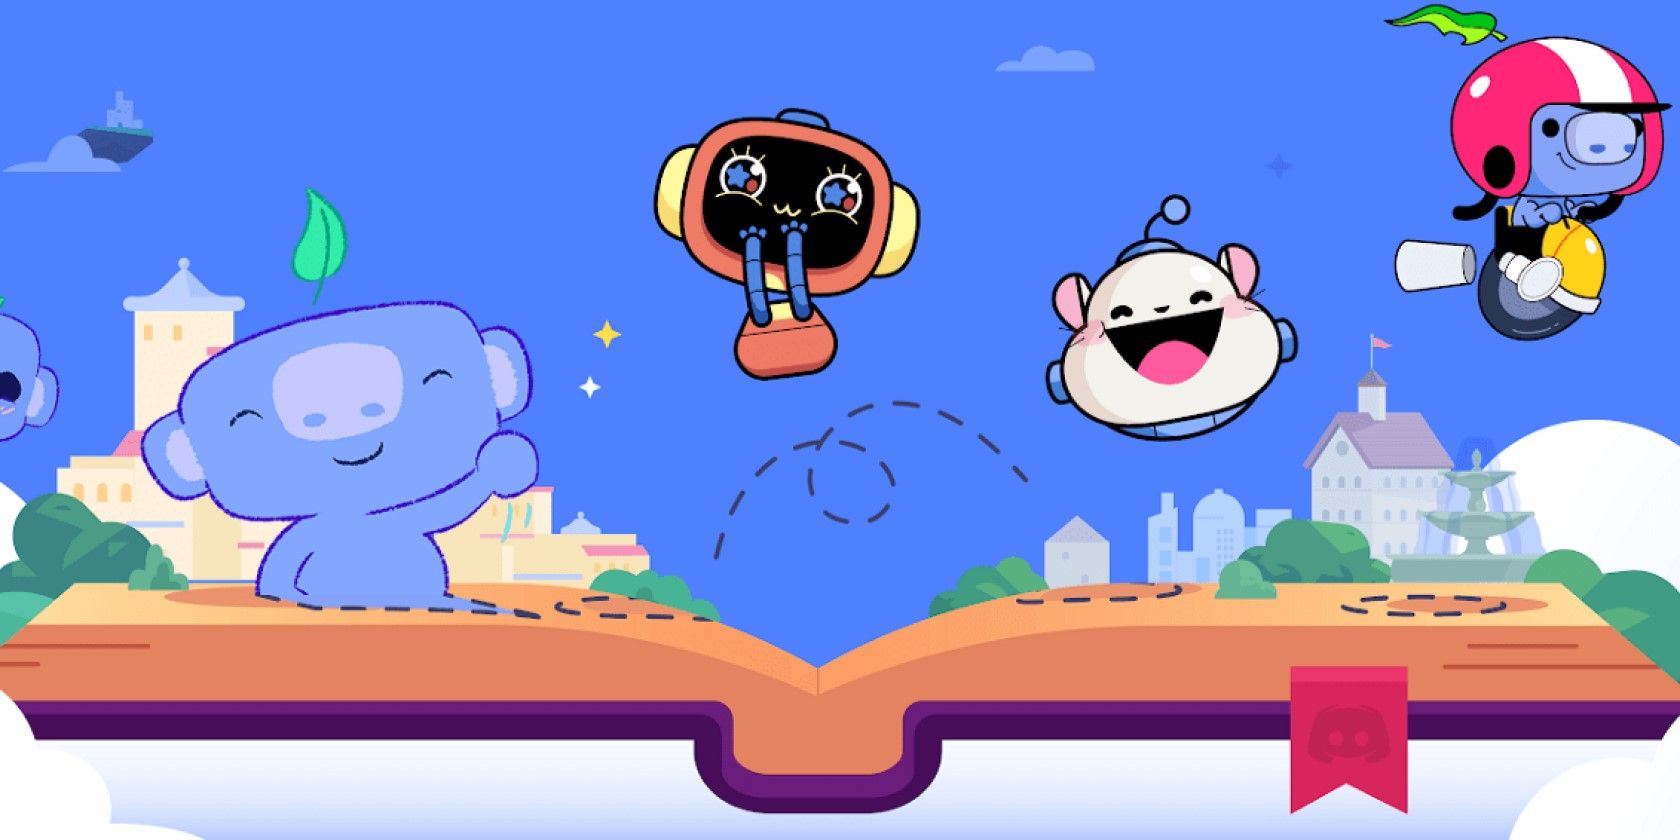 Discord Adds Animated Stickers to Chats